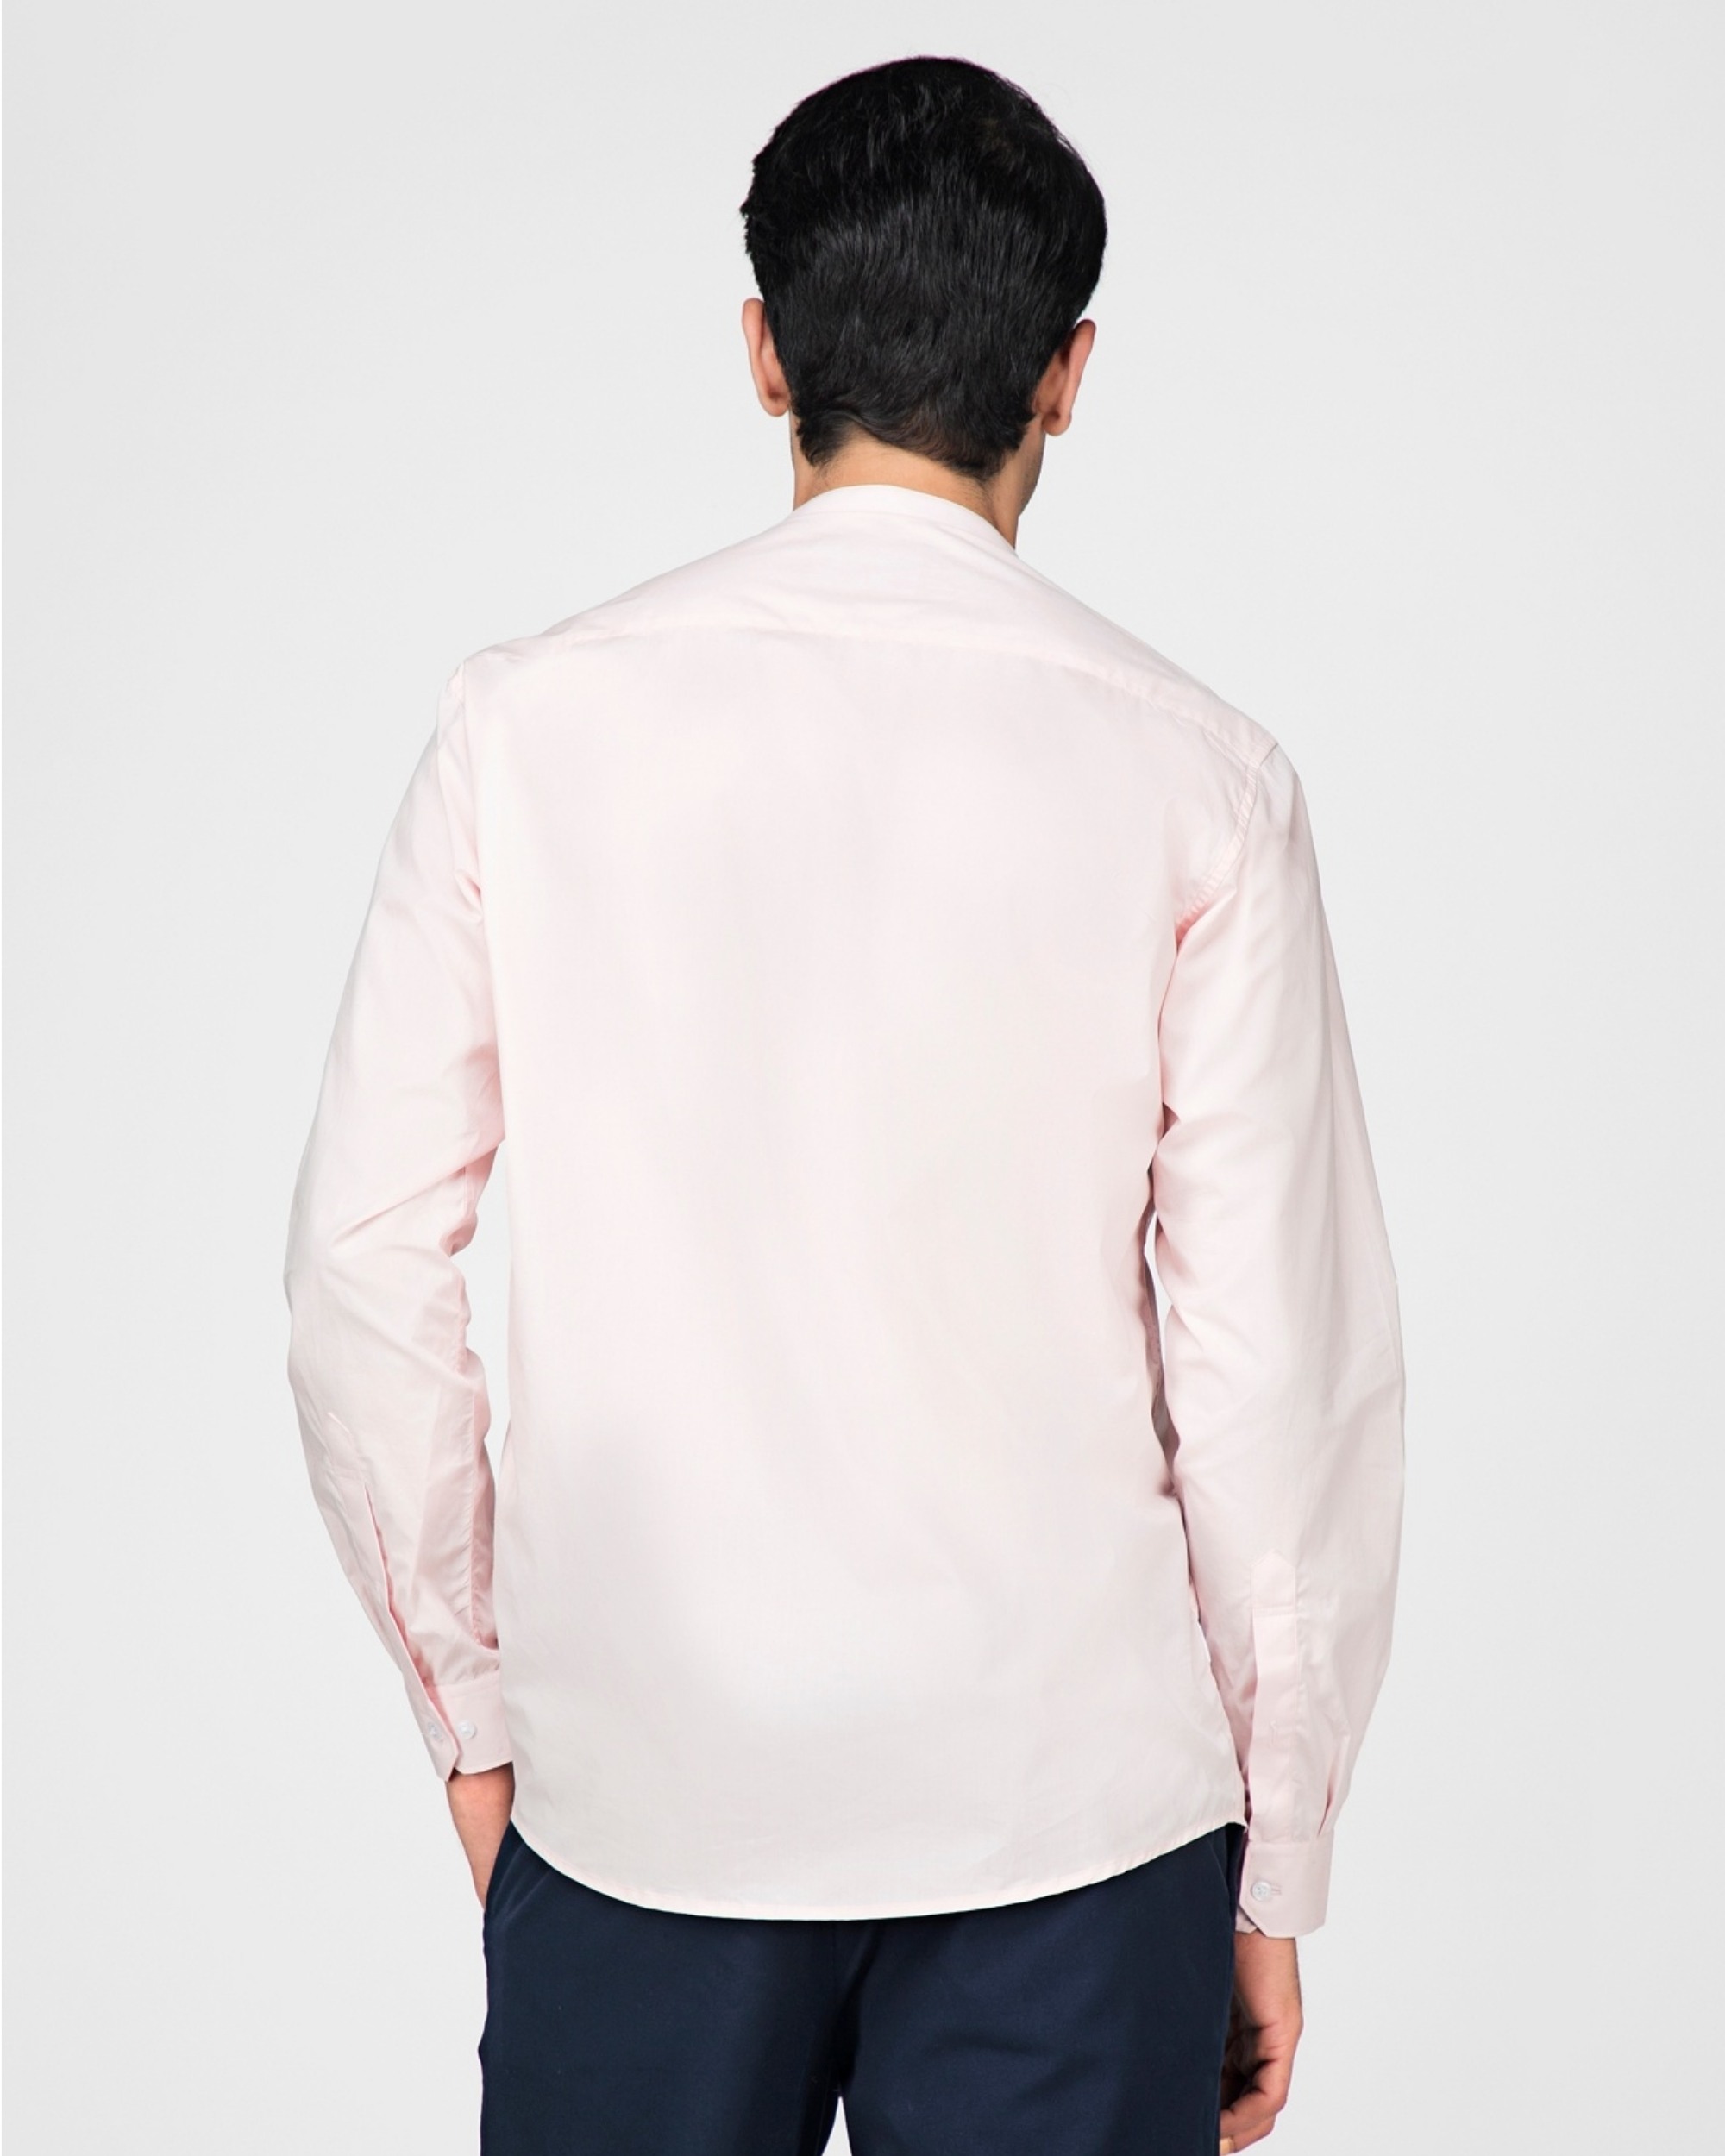 Light pink and white panel striped shirt by Green Hill | The Secret Label